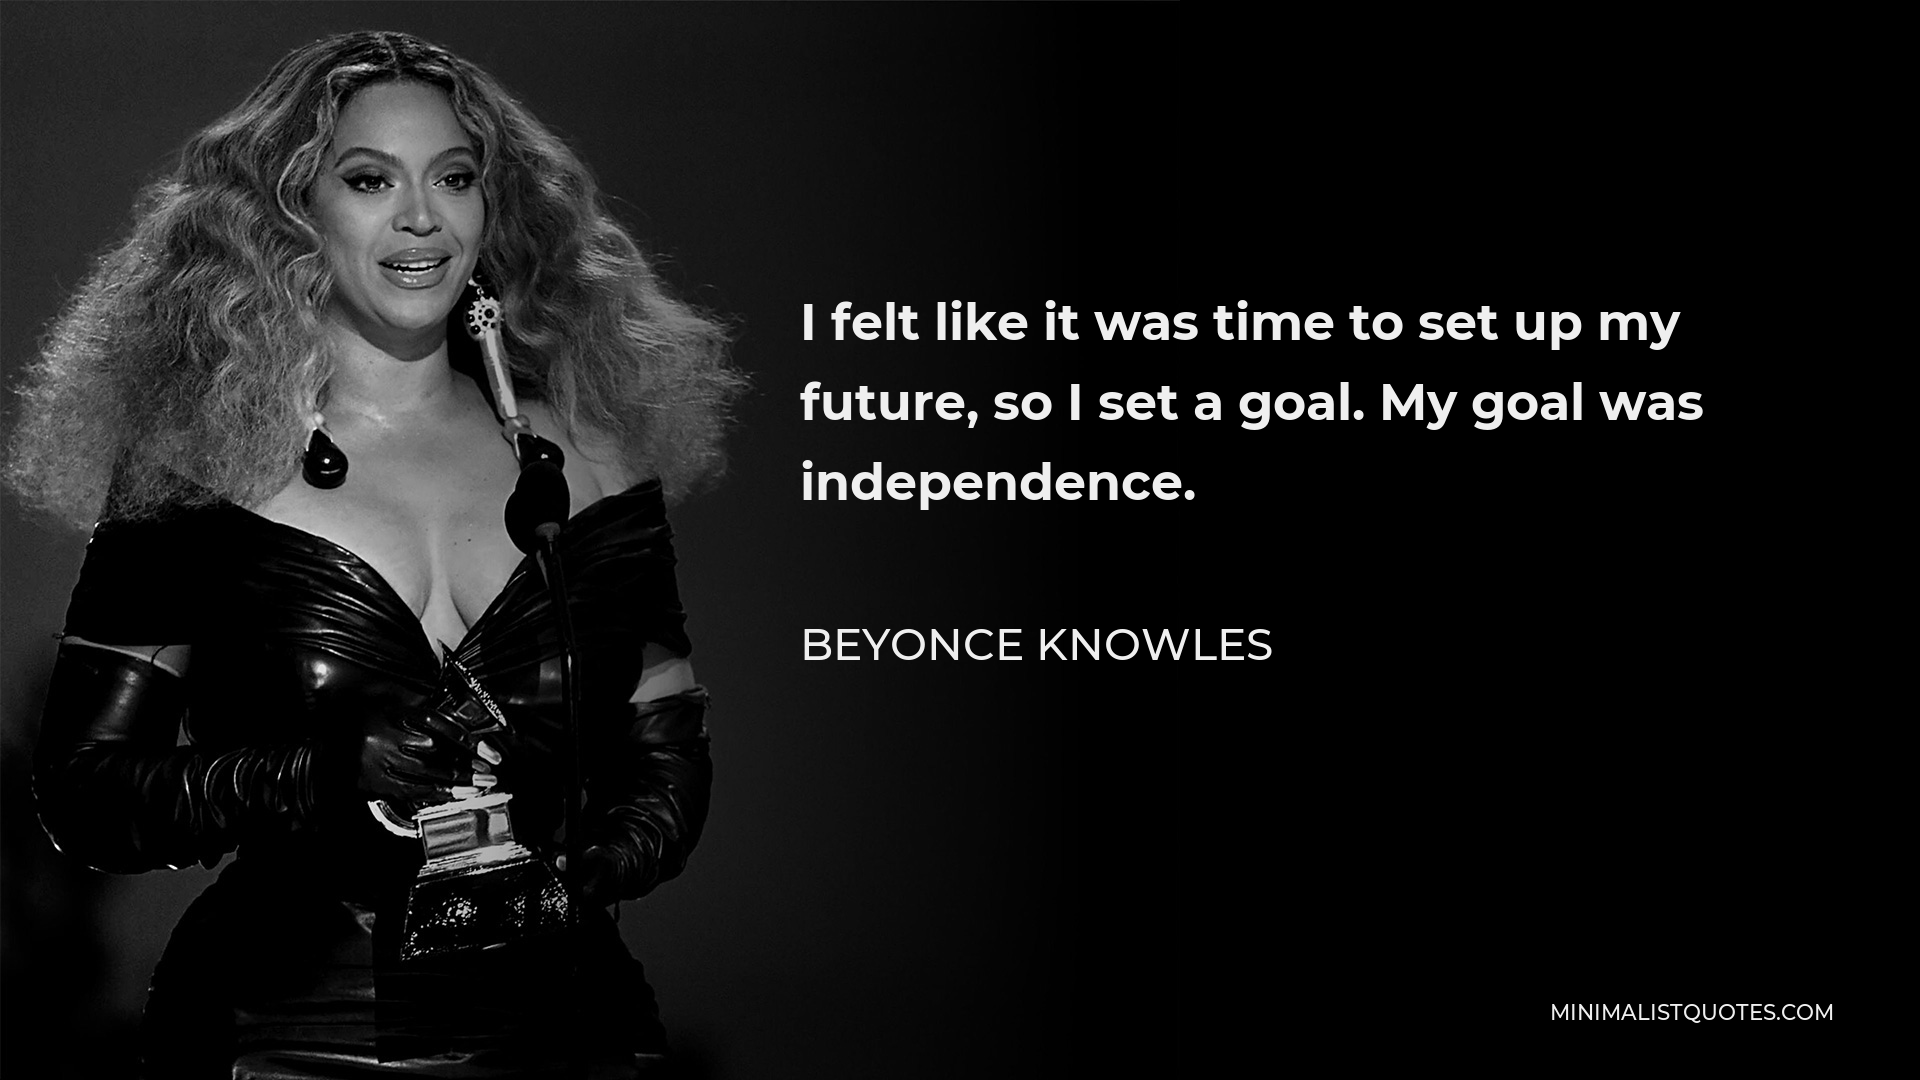 Beyonce Knowles Quote - I felt like it was time to set up my future, so I set a goal. My goal was independence.